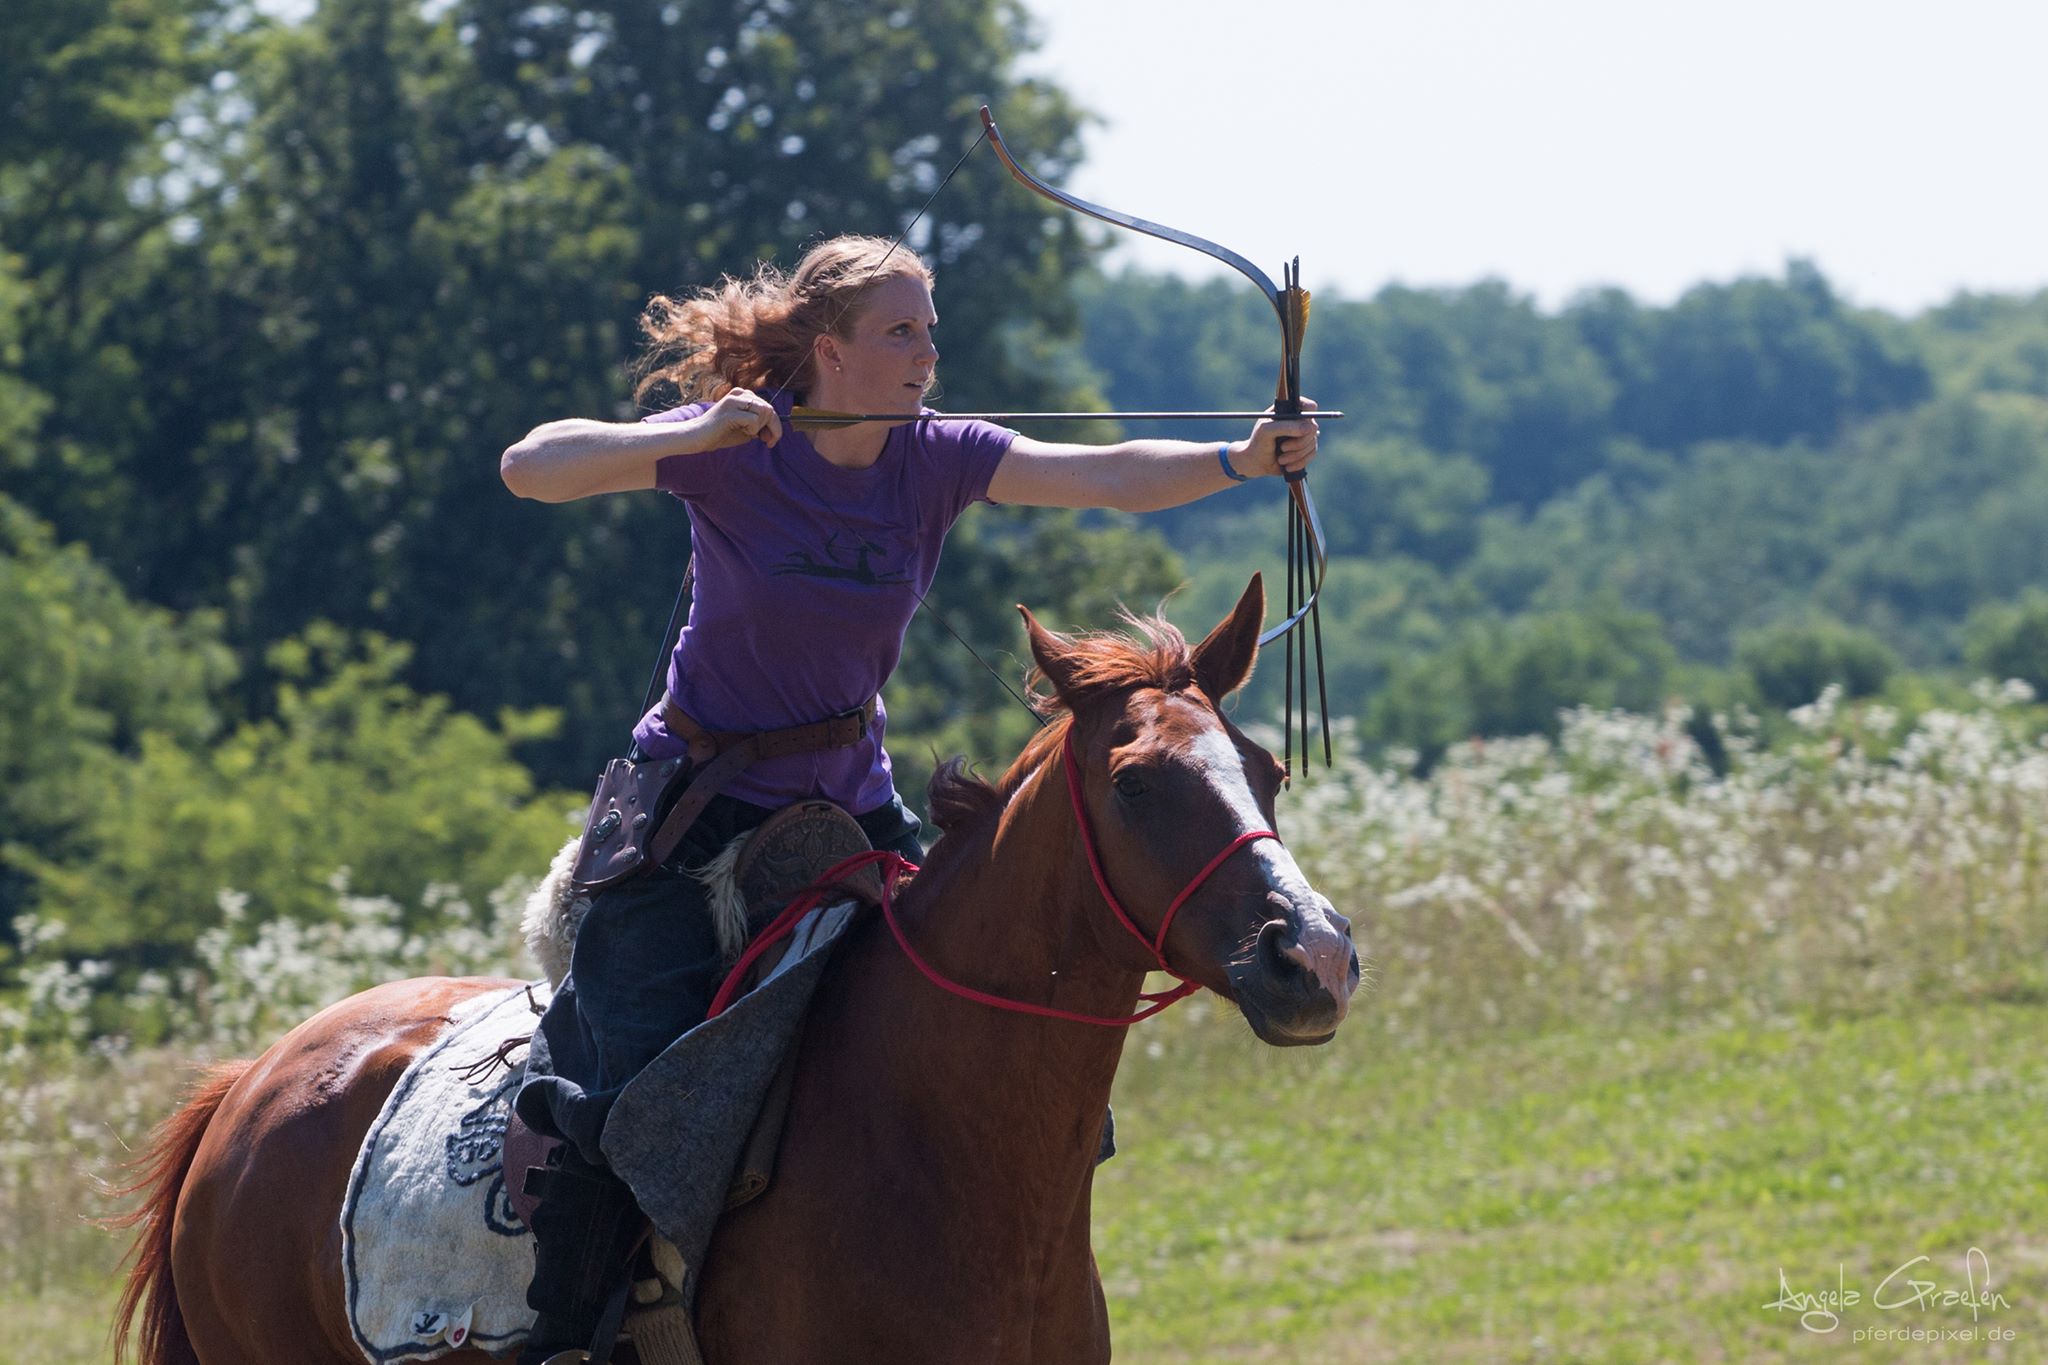 Mounted Archery, Horse Training, Riding Lessons, and Archery Lessons!